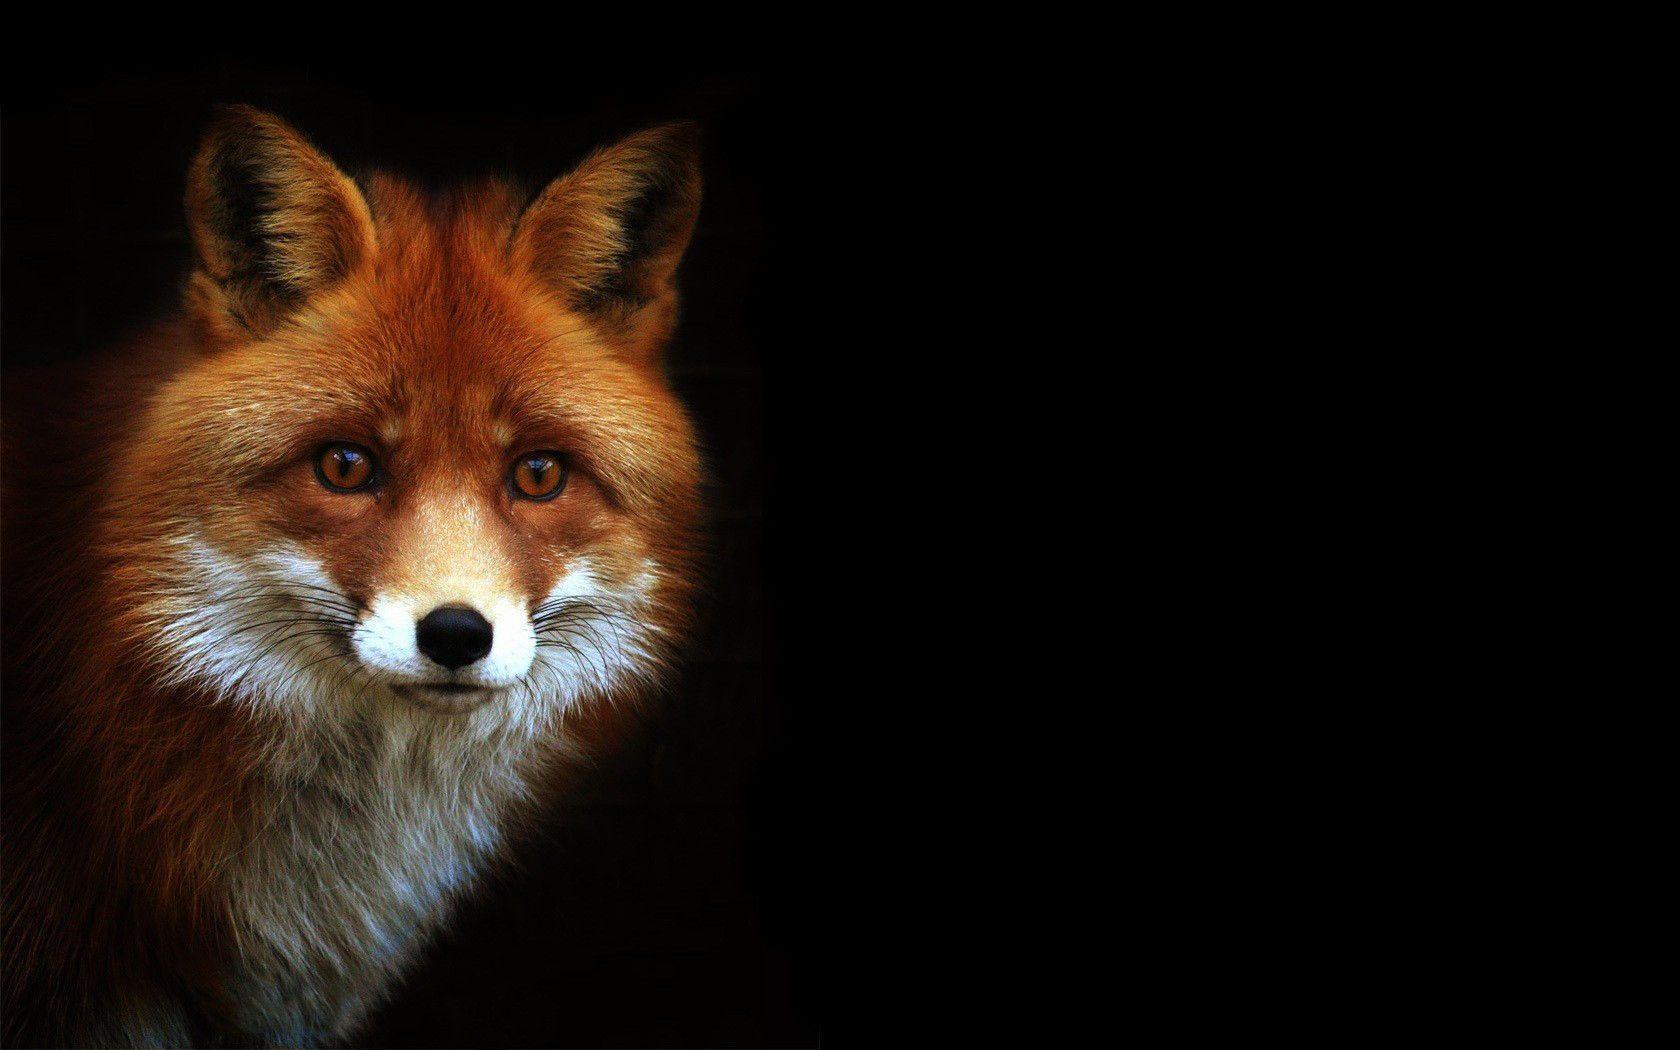 image about Foxes. Red fox, Eyes and Animals